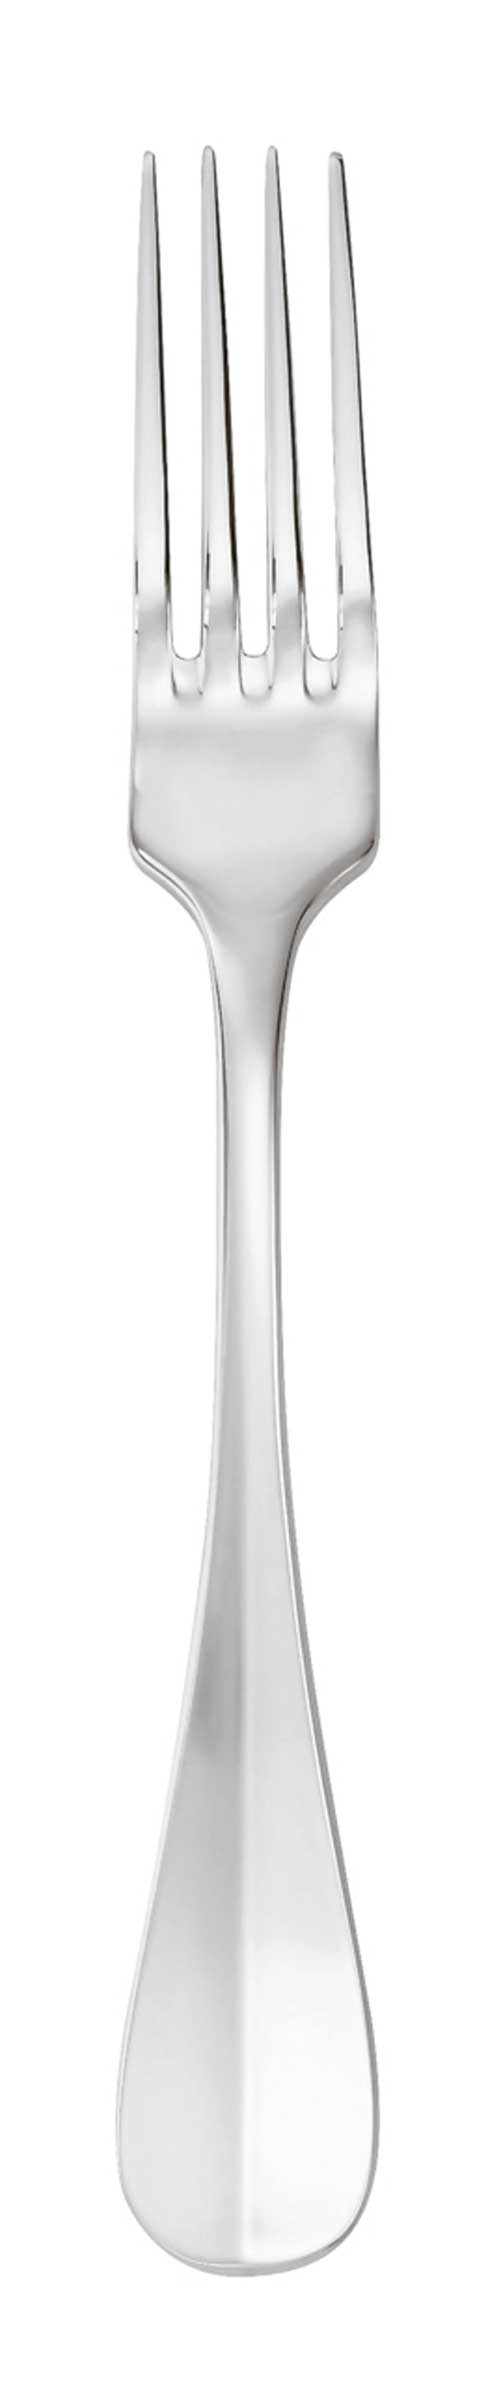 $47.00 Table Fork Silverplated on 18/10 s/s